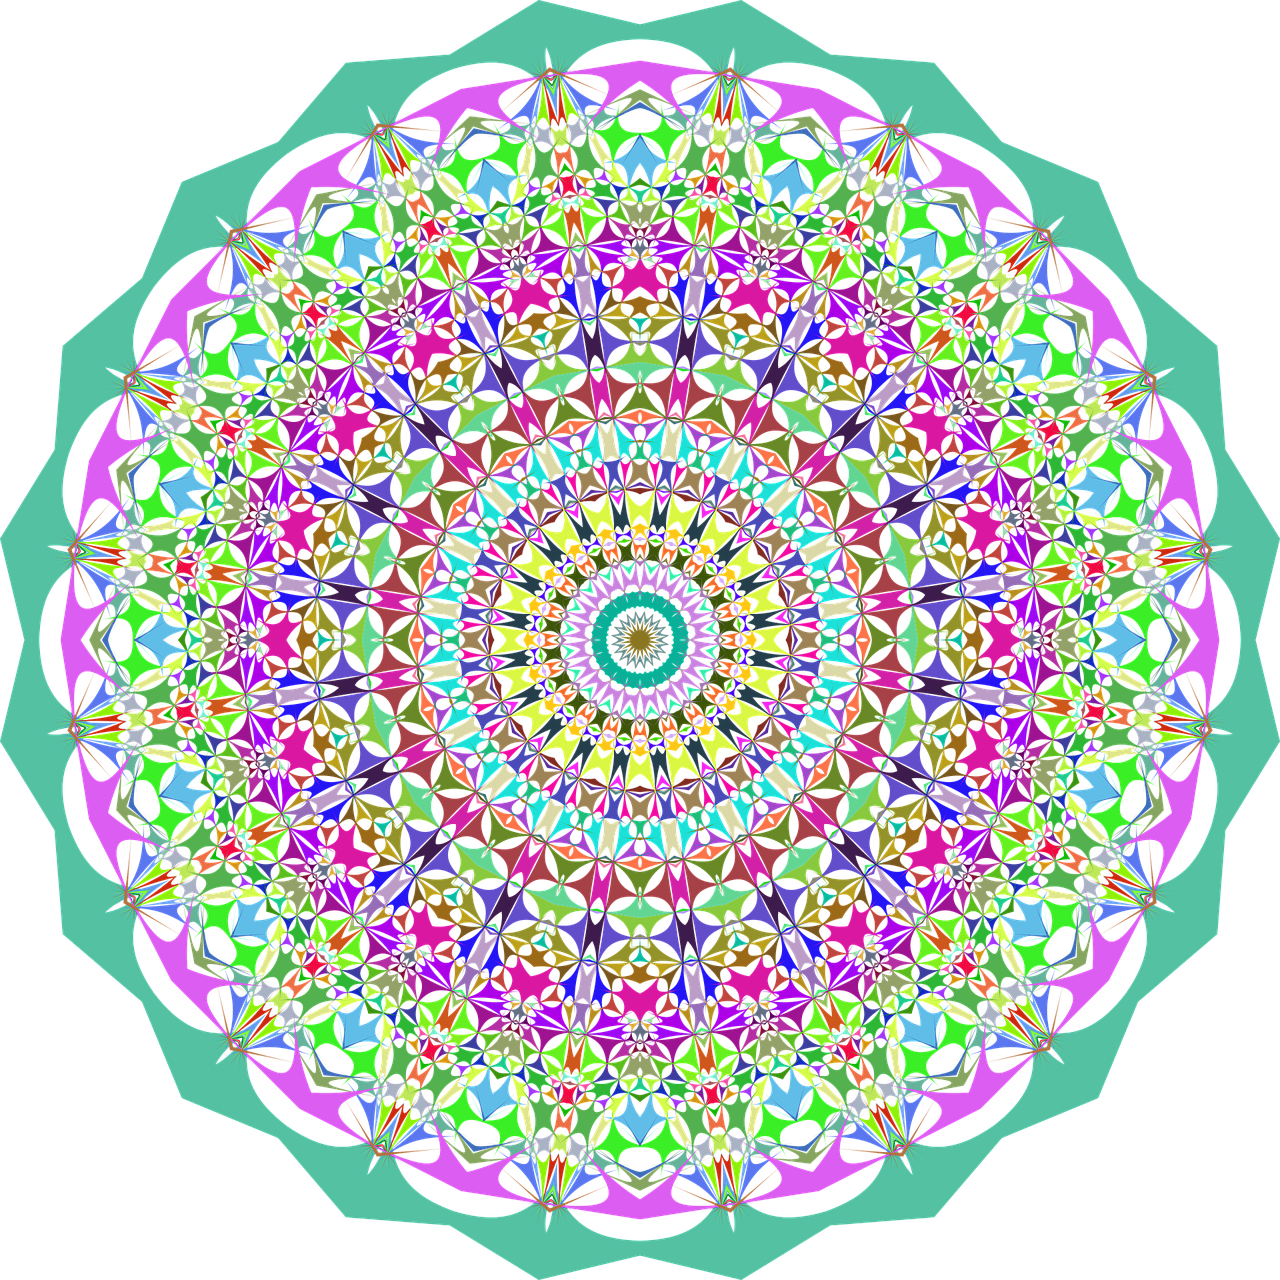 a colorful round - like image is seen in black and white